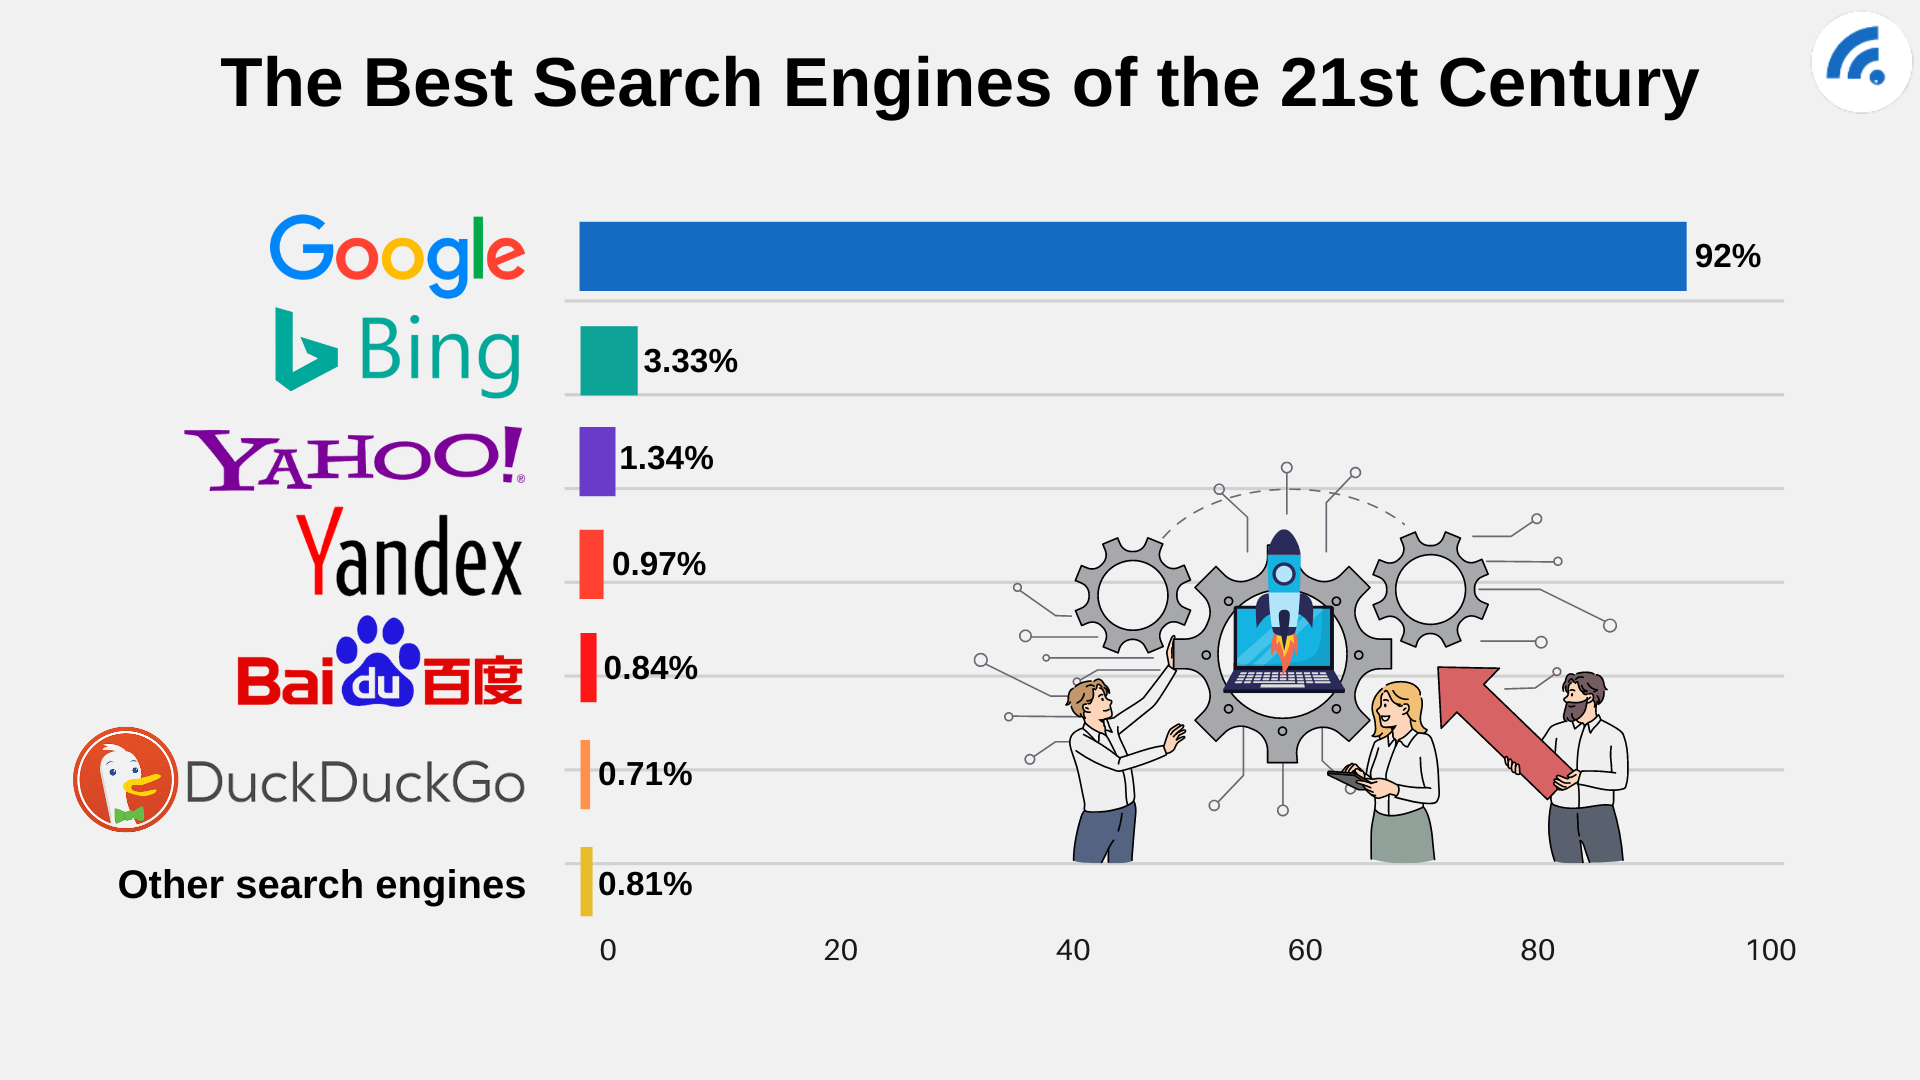 What is the very best search engine?